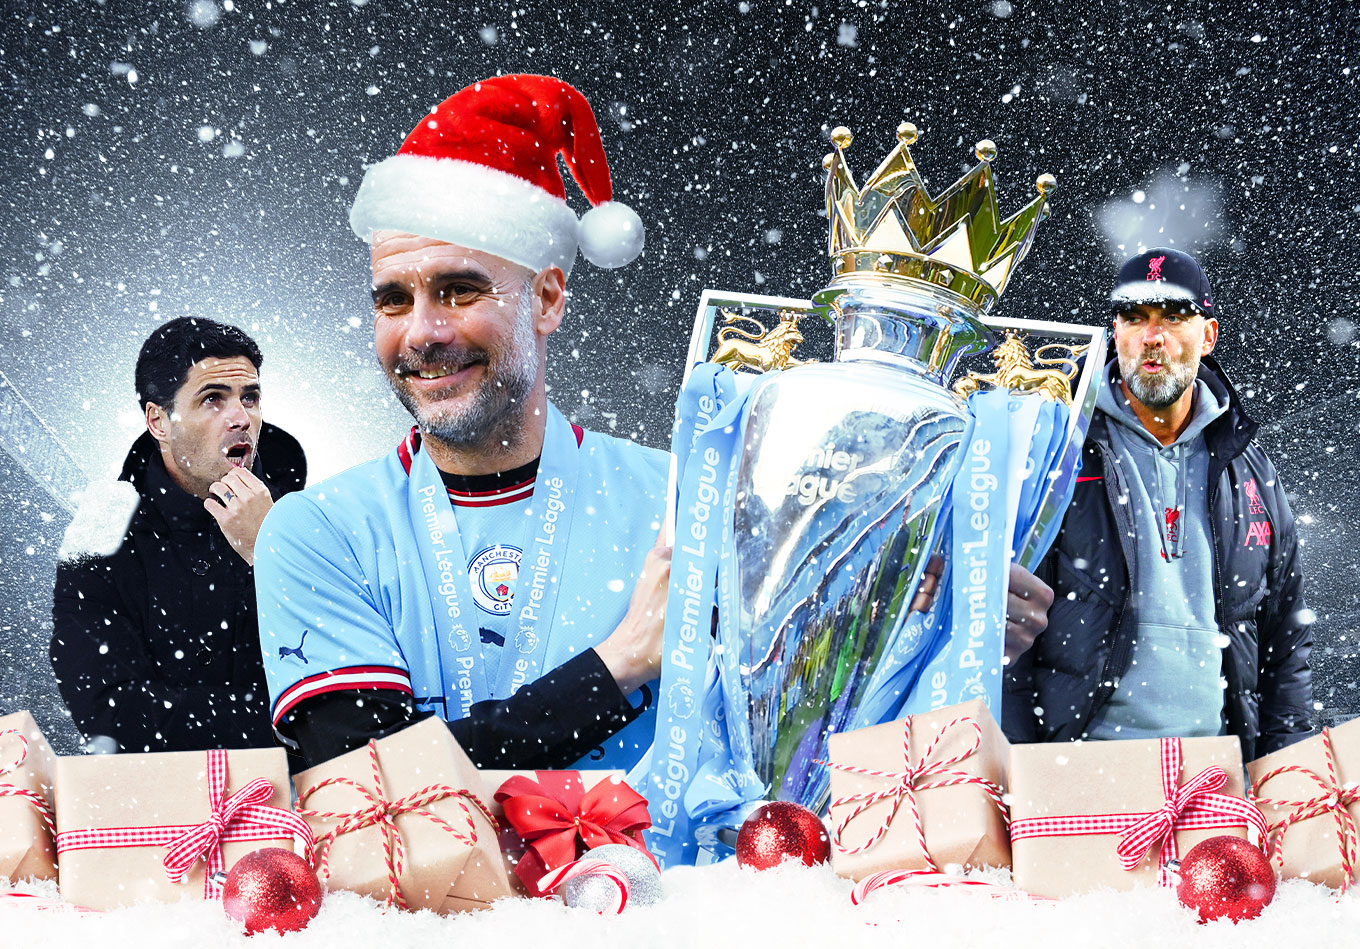 Top of the League at Christmas: Does It Mean Anything?